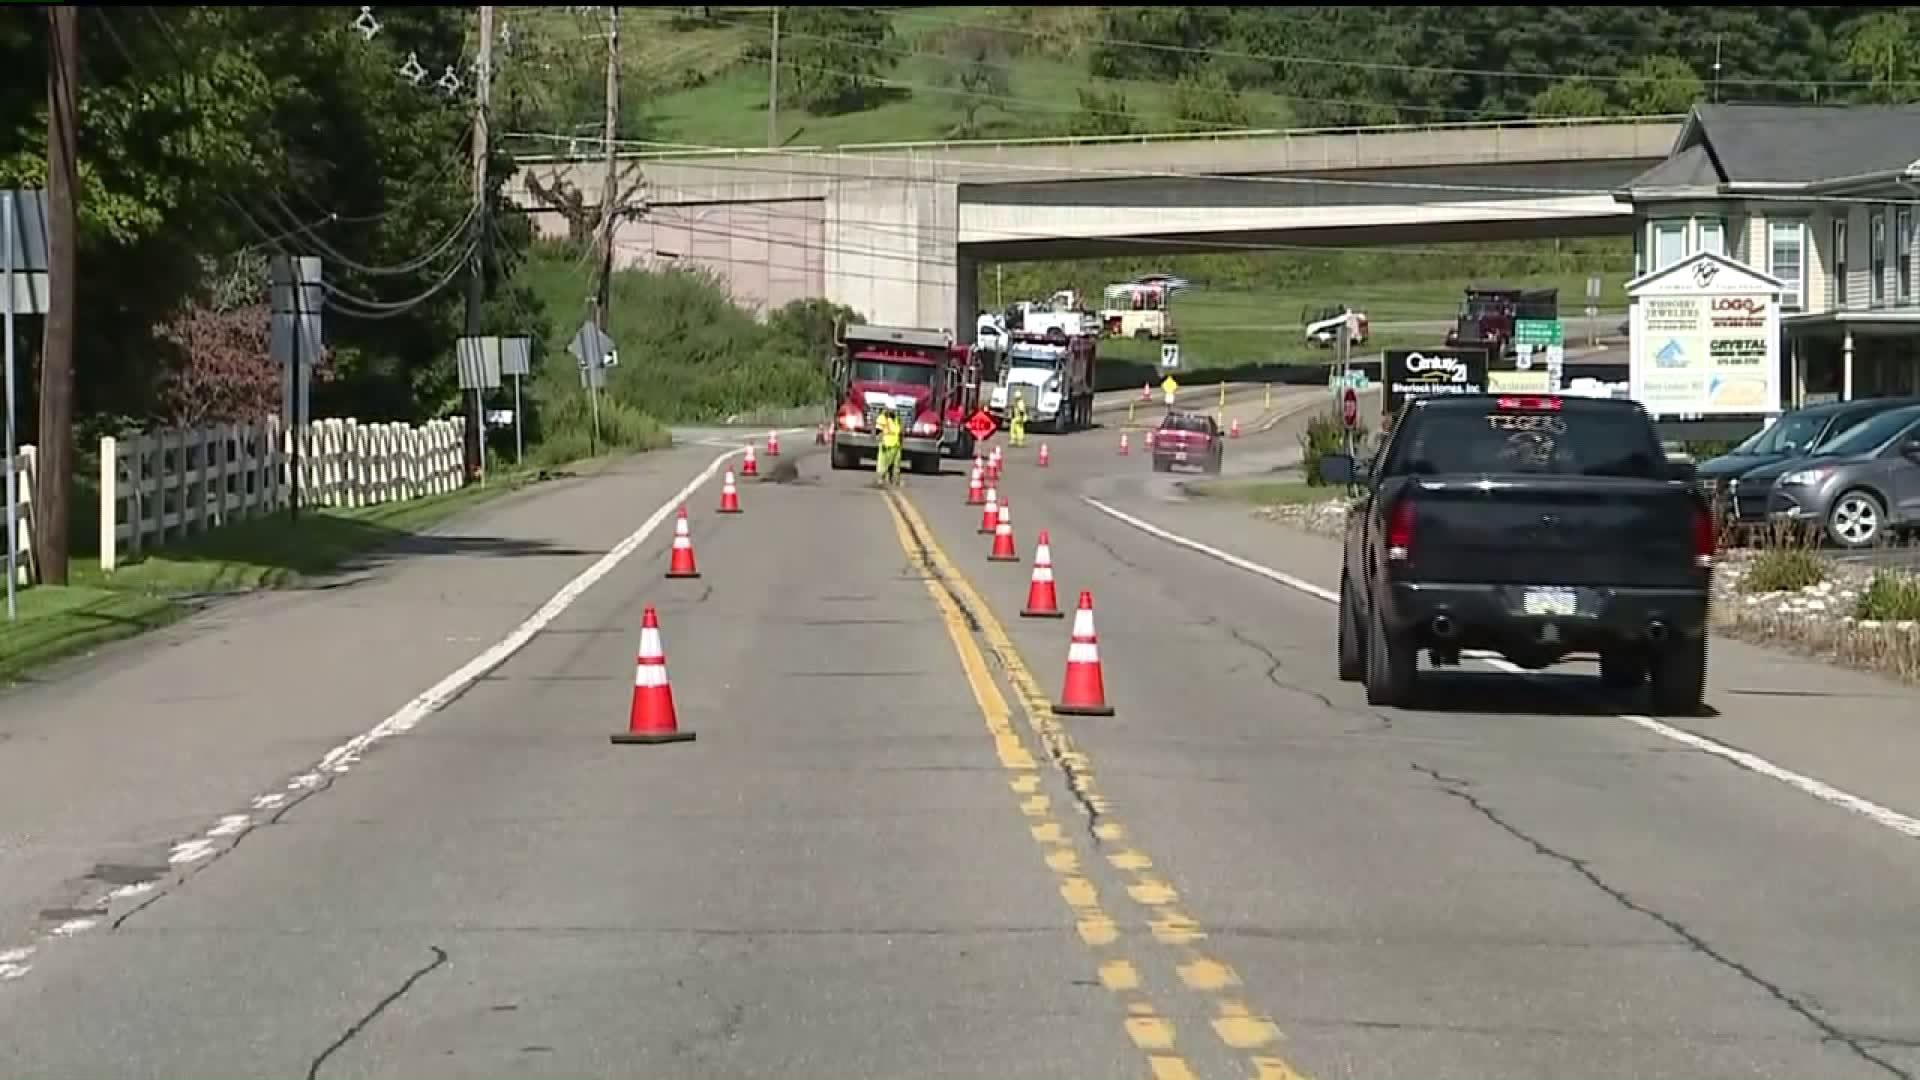 Paving Project Could Cause Delays in Tunkhannock